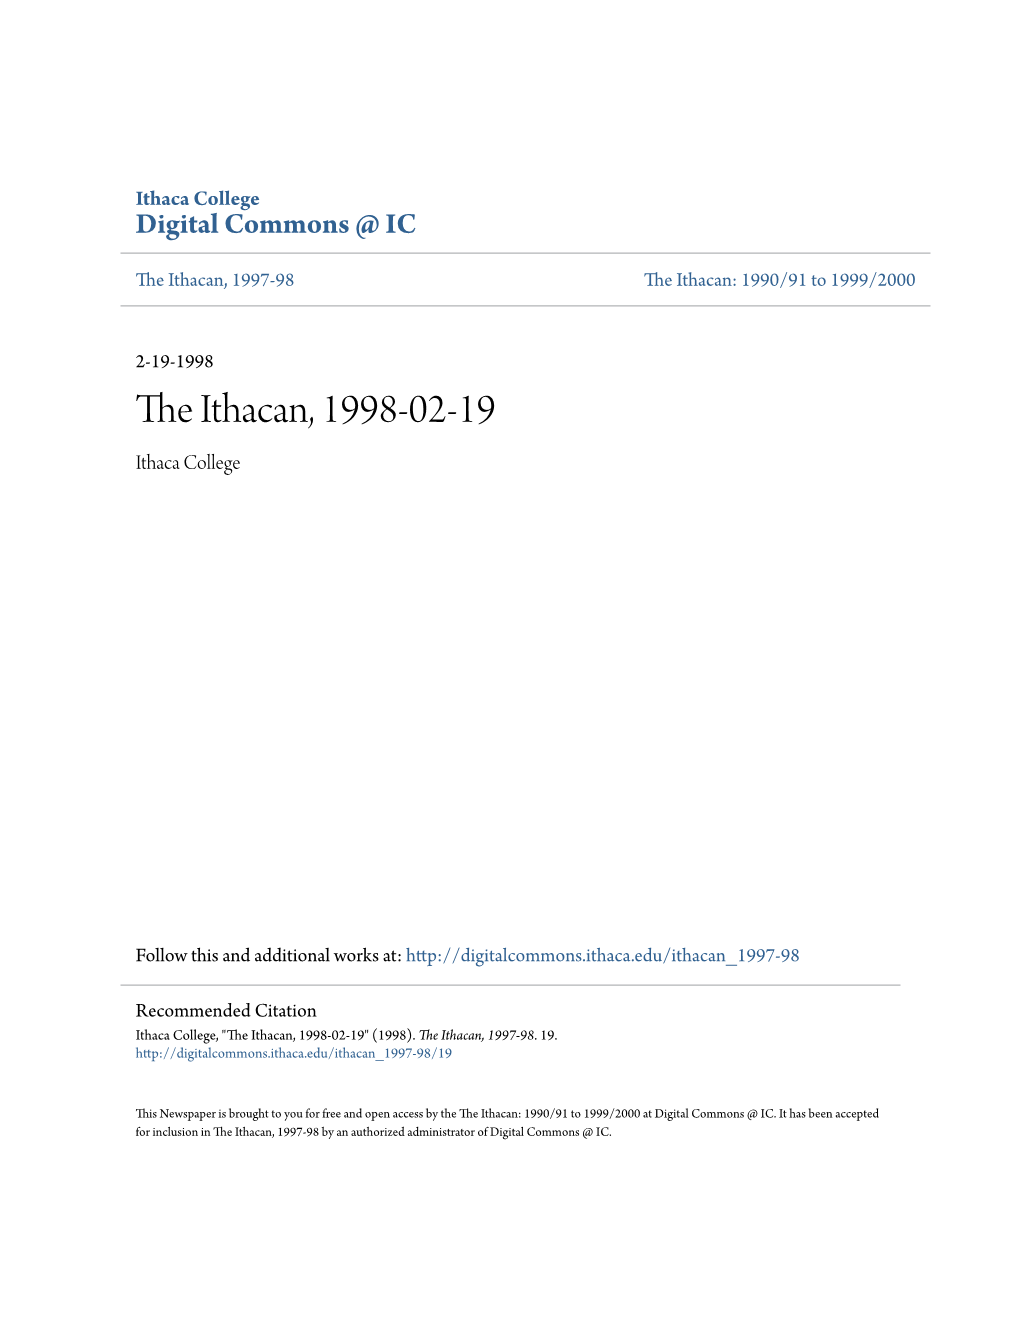 The Ithacan, 1998-02-19